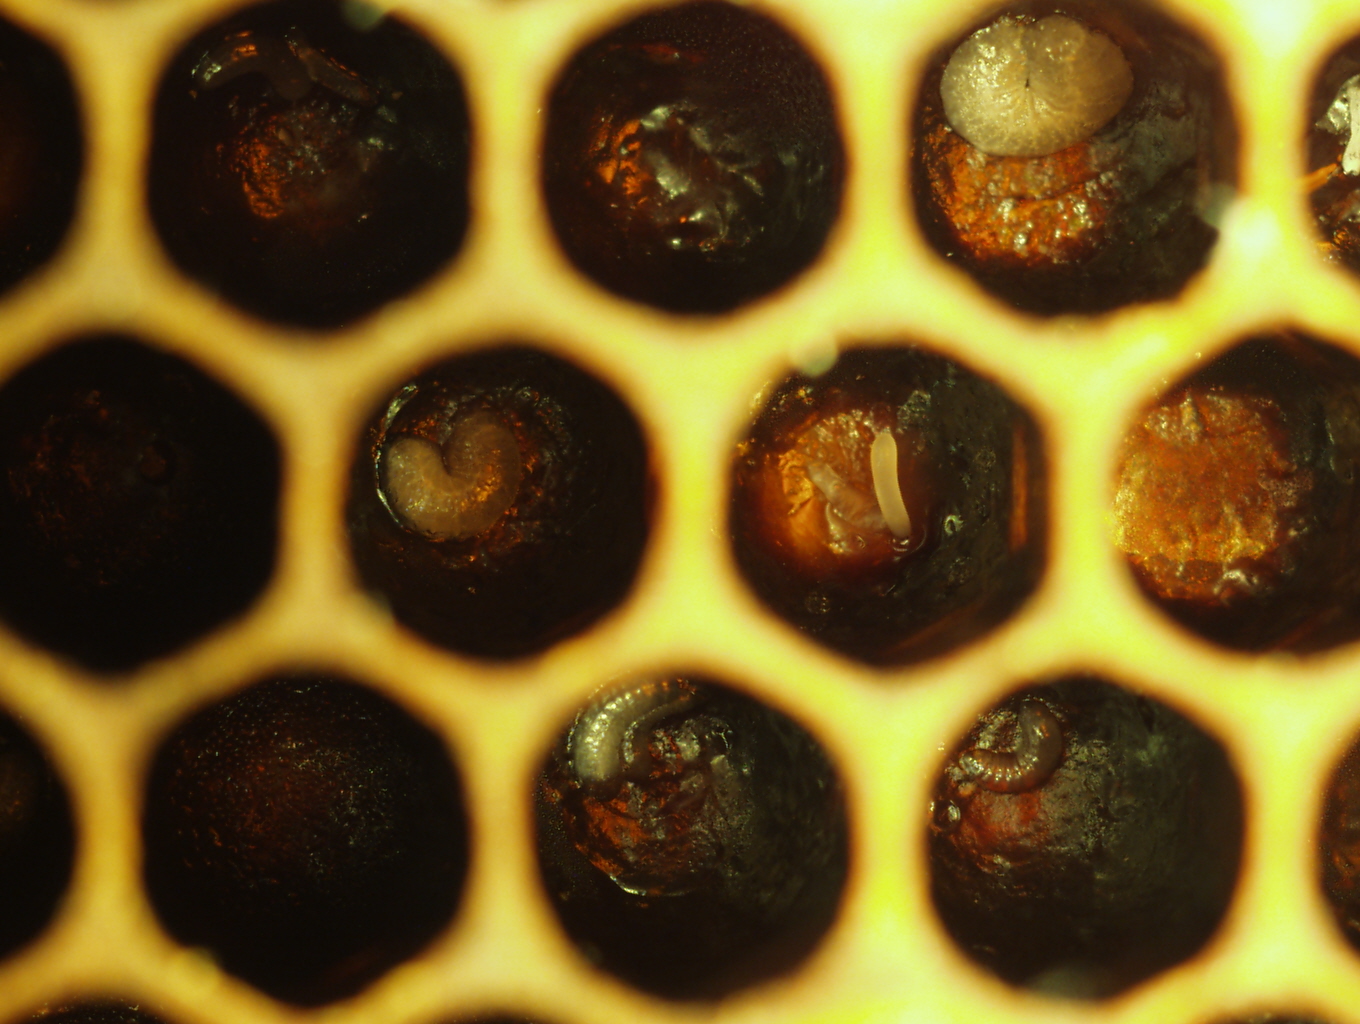 A hive frame showing potential signs of EFB (brown discolouration of the larvae). EFB frames also tend to show larvae in various stages of development within close proximity to each other. Photos: Jocelyne Chalifour.